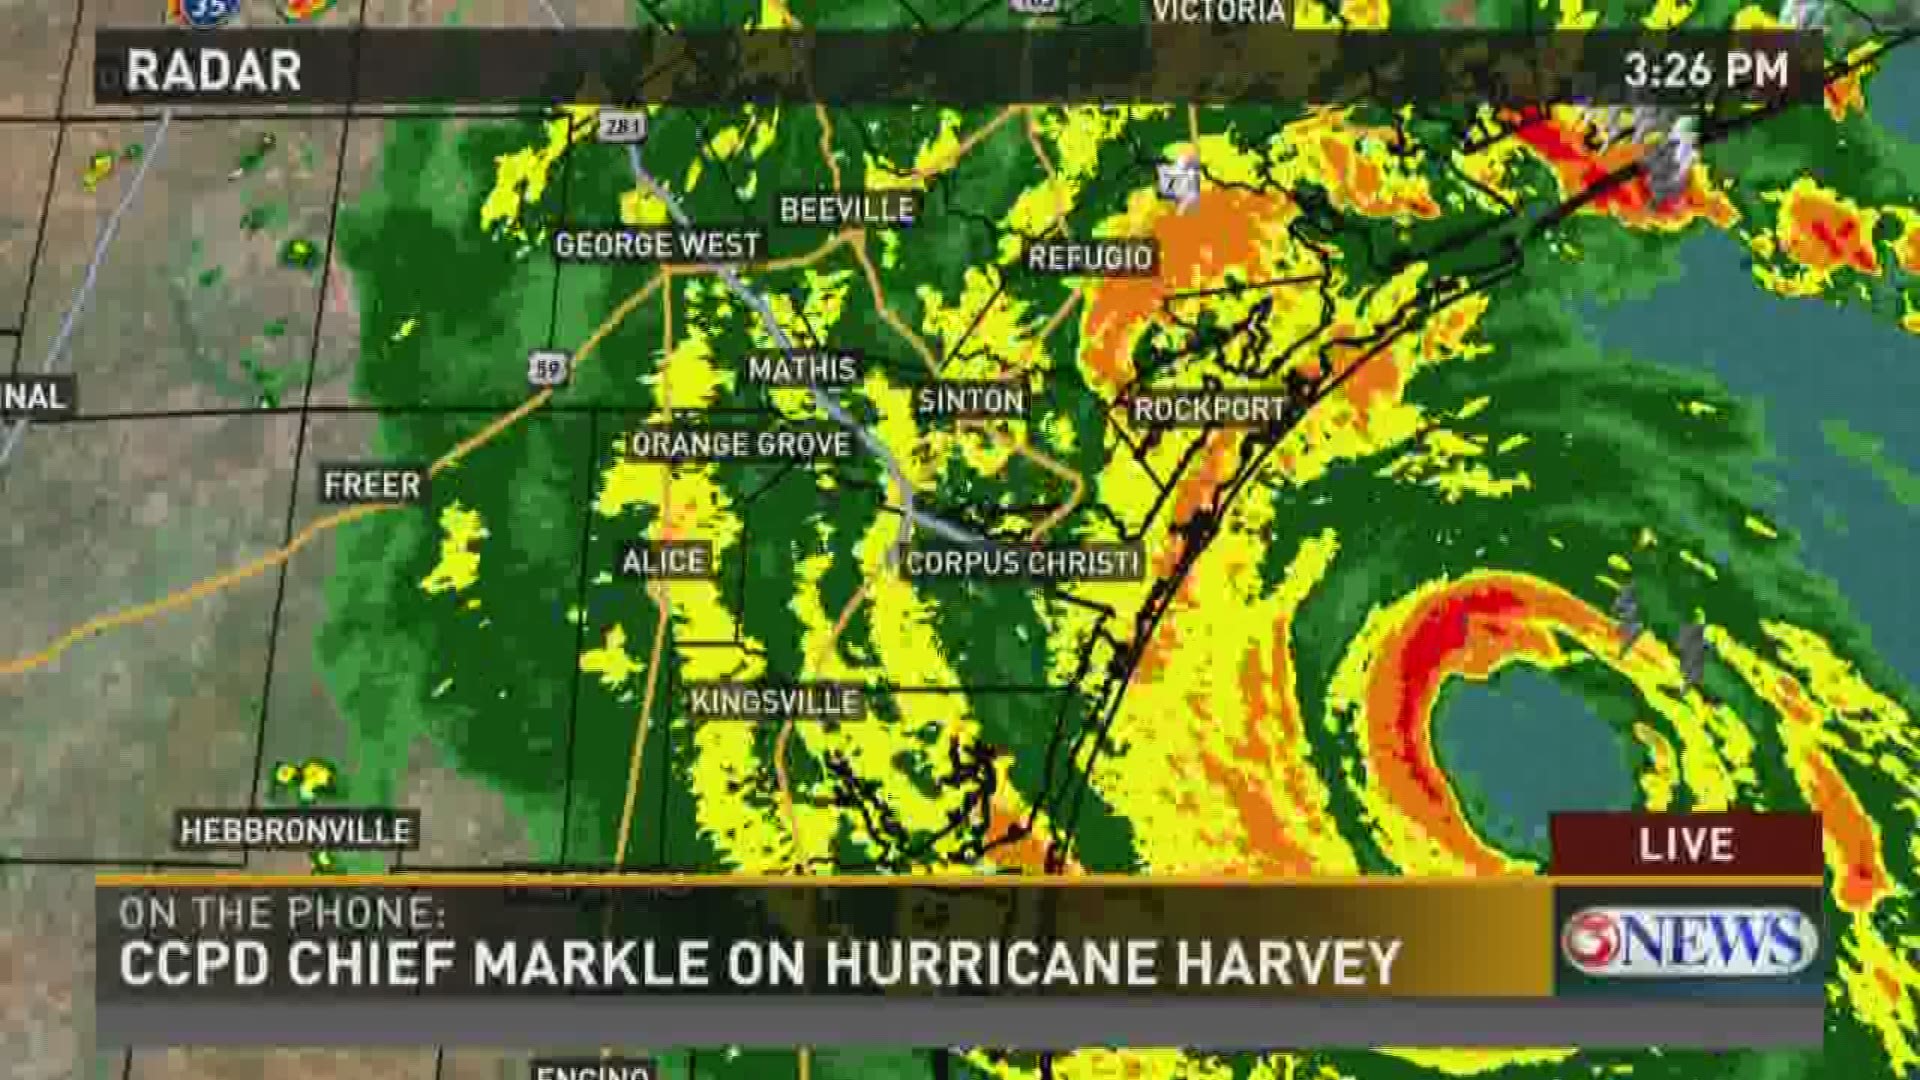 The Corpus Christi Police Chief gives an update on the situation ahead of Hurricane Harvey making landfall. (8/25 3:15 p.m.) 